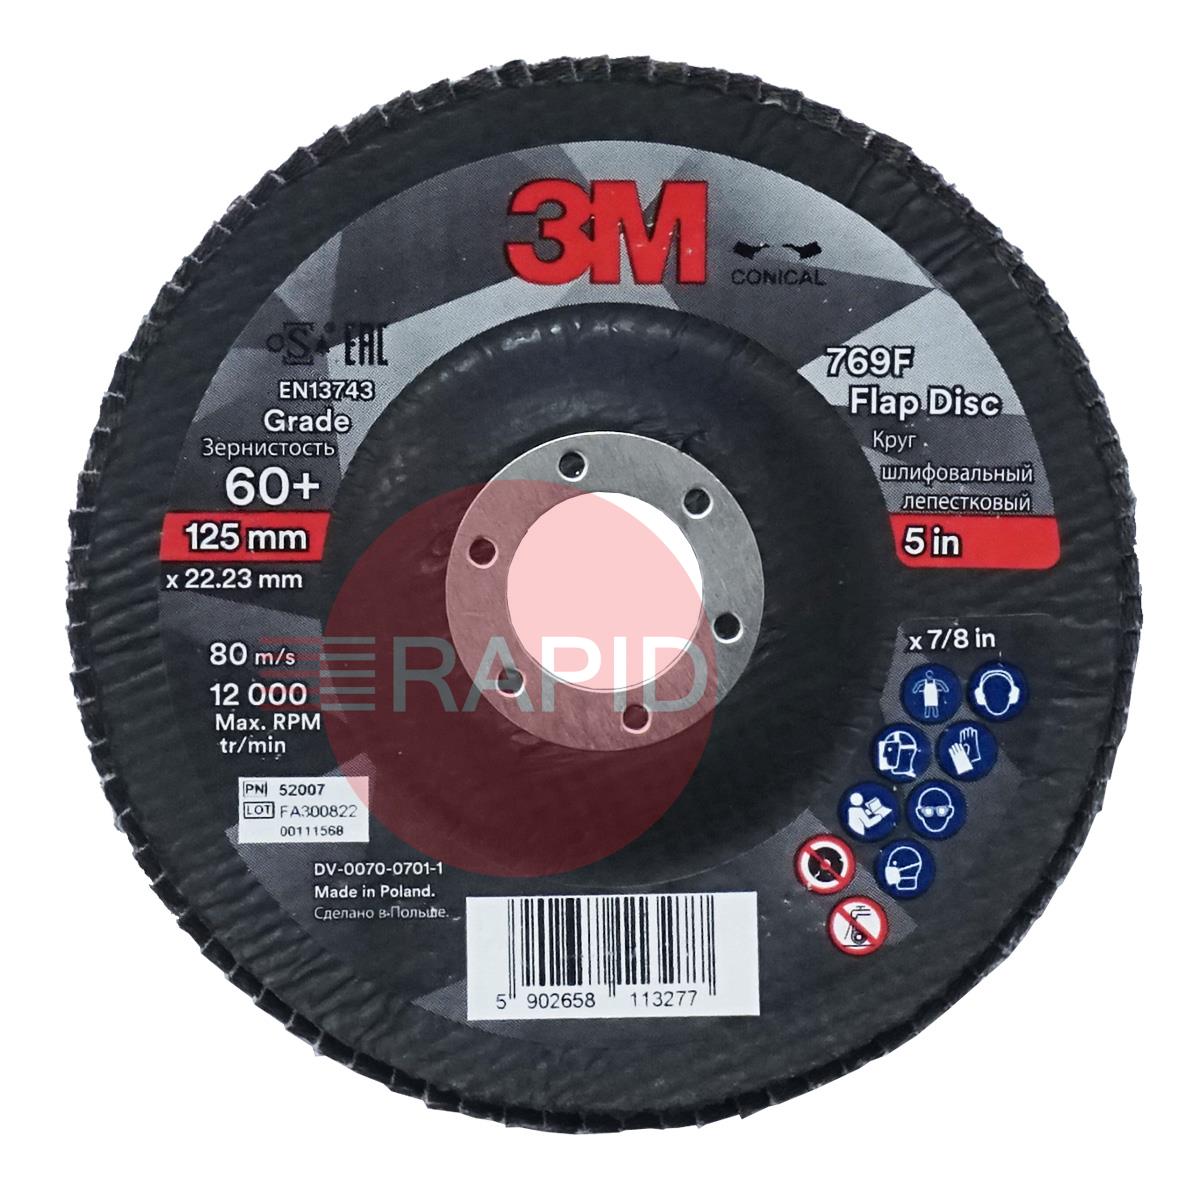 3M-52007  3M Silver Conical Flap Disc 769F 125mm x 22.23mm, 60+ Grit (Box of 10)